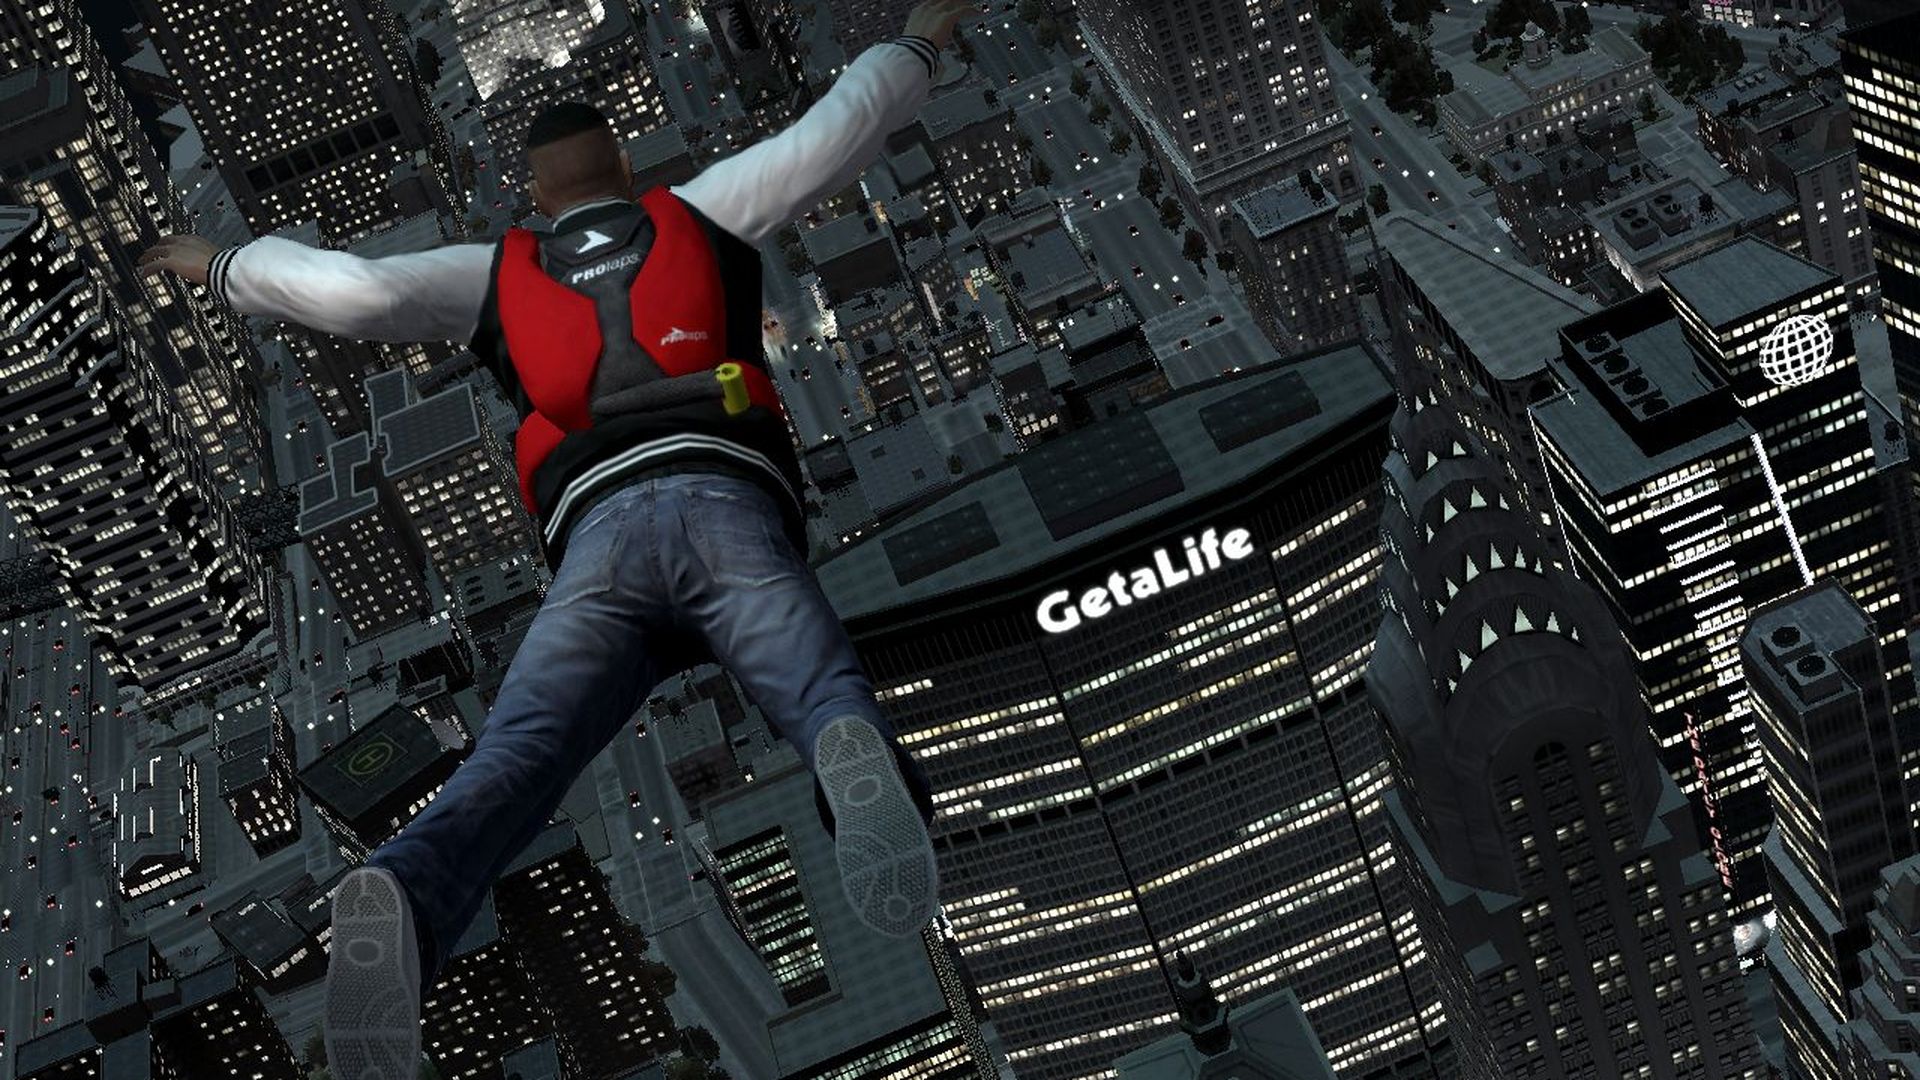 Video game screenshot of a man parachuting over what looks like New York City